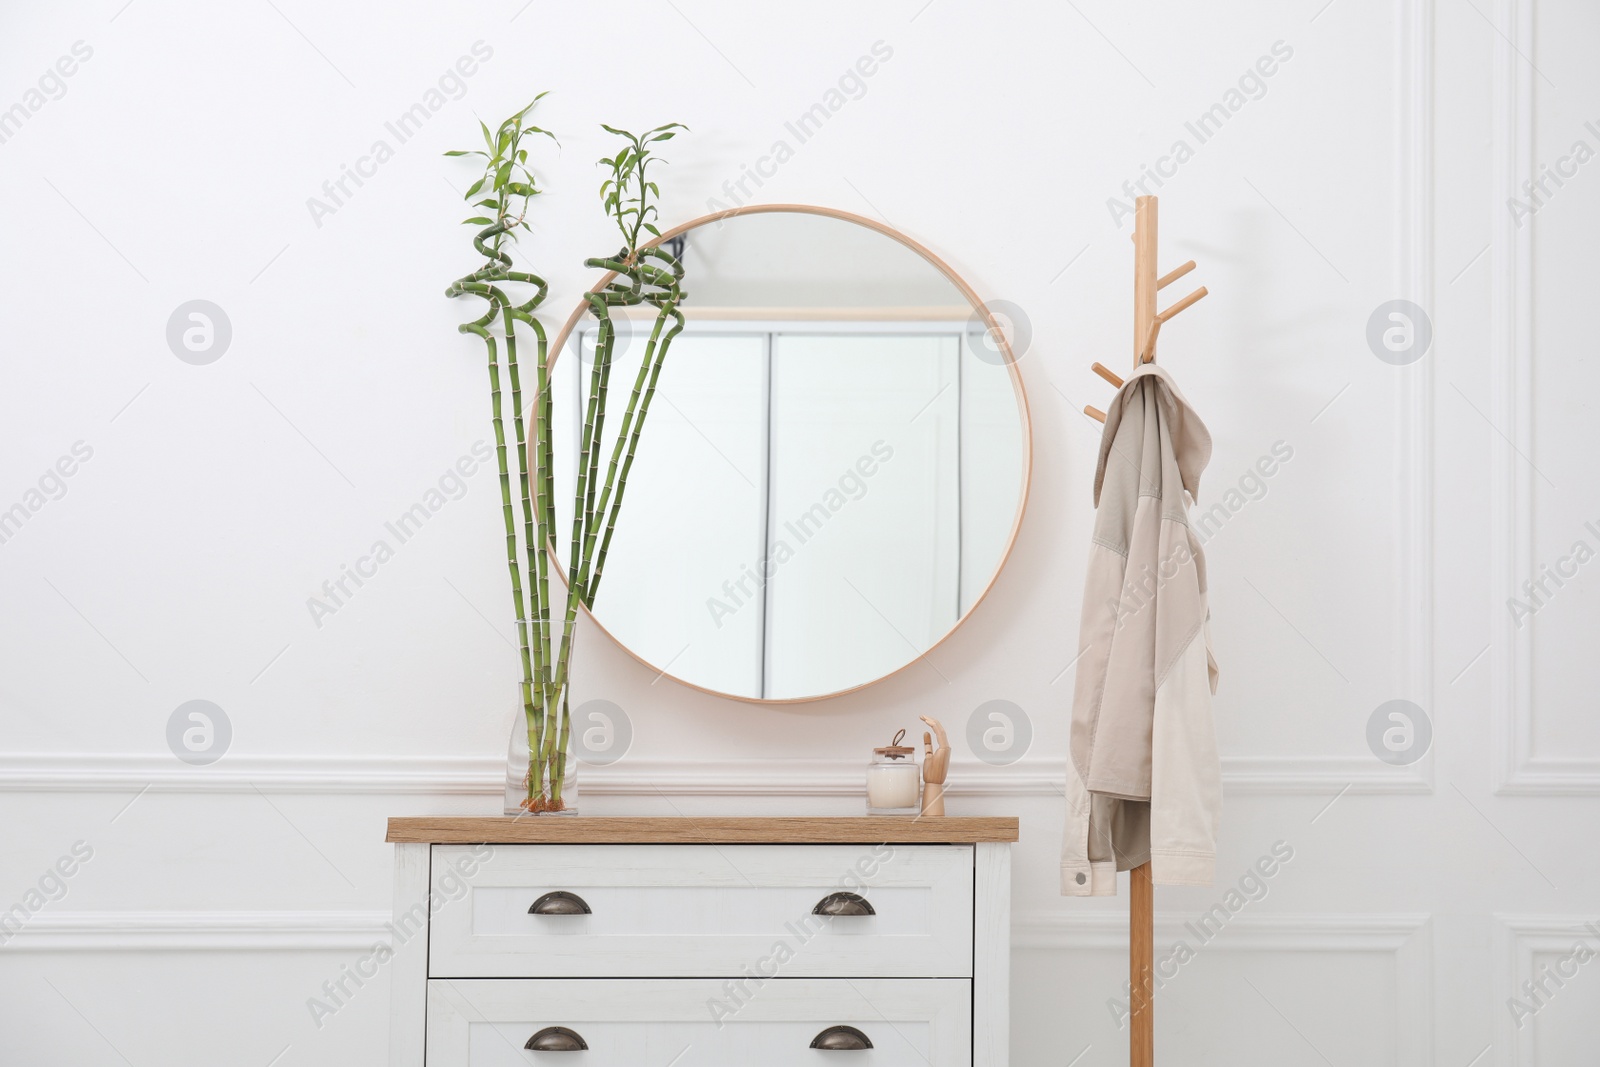 Photo of Vase with Lucky bamboo on chest of drawers in hallway. Stylish interior